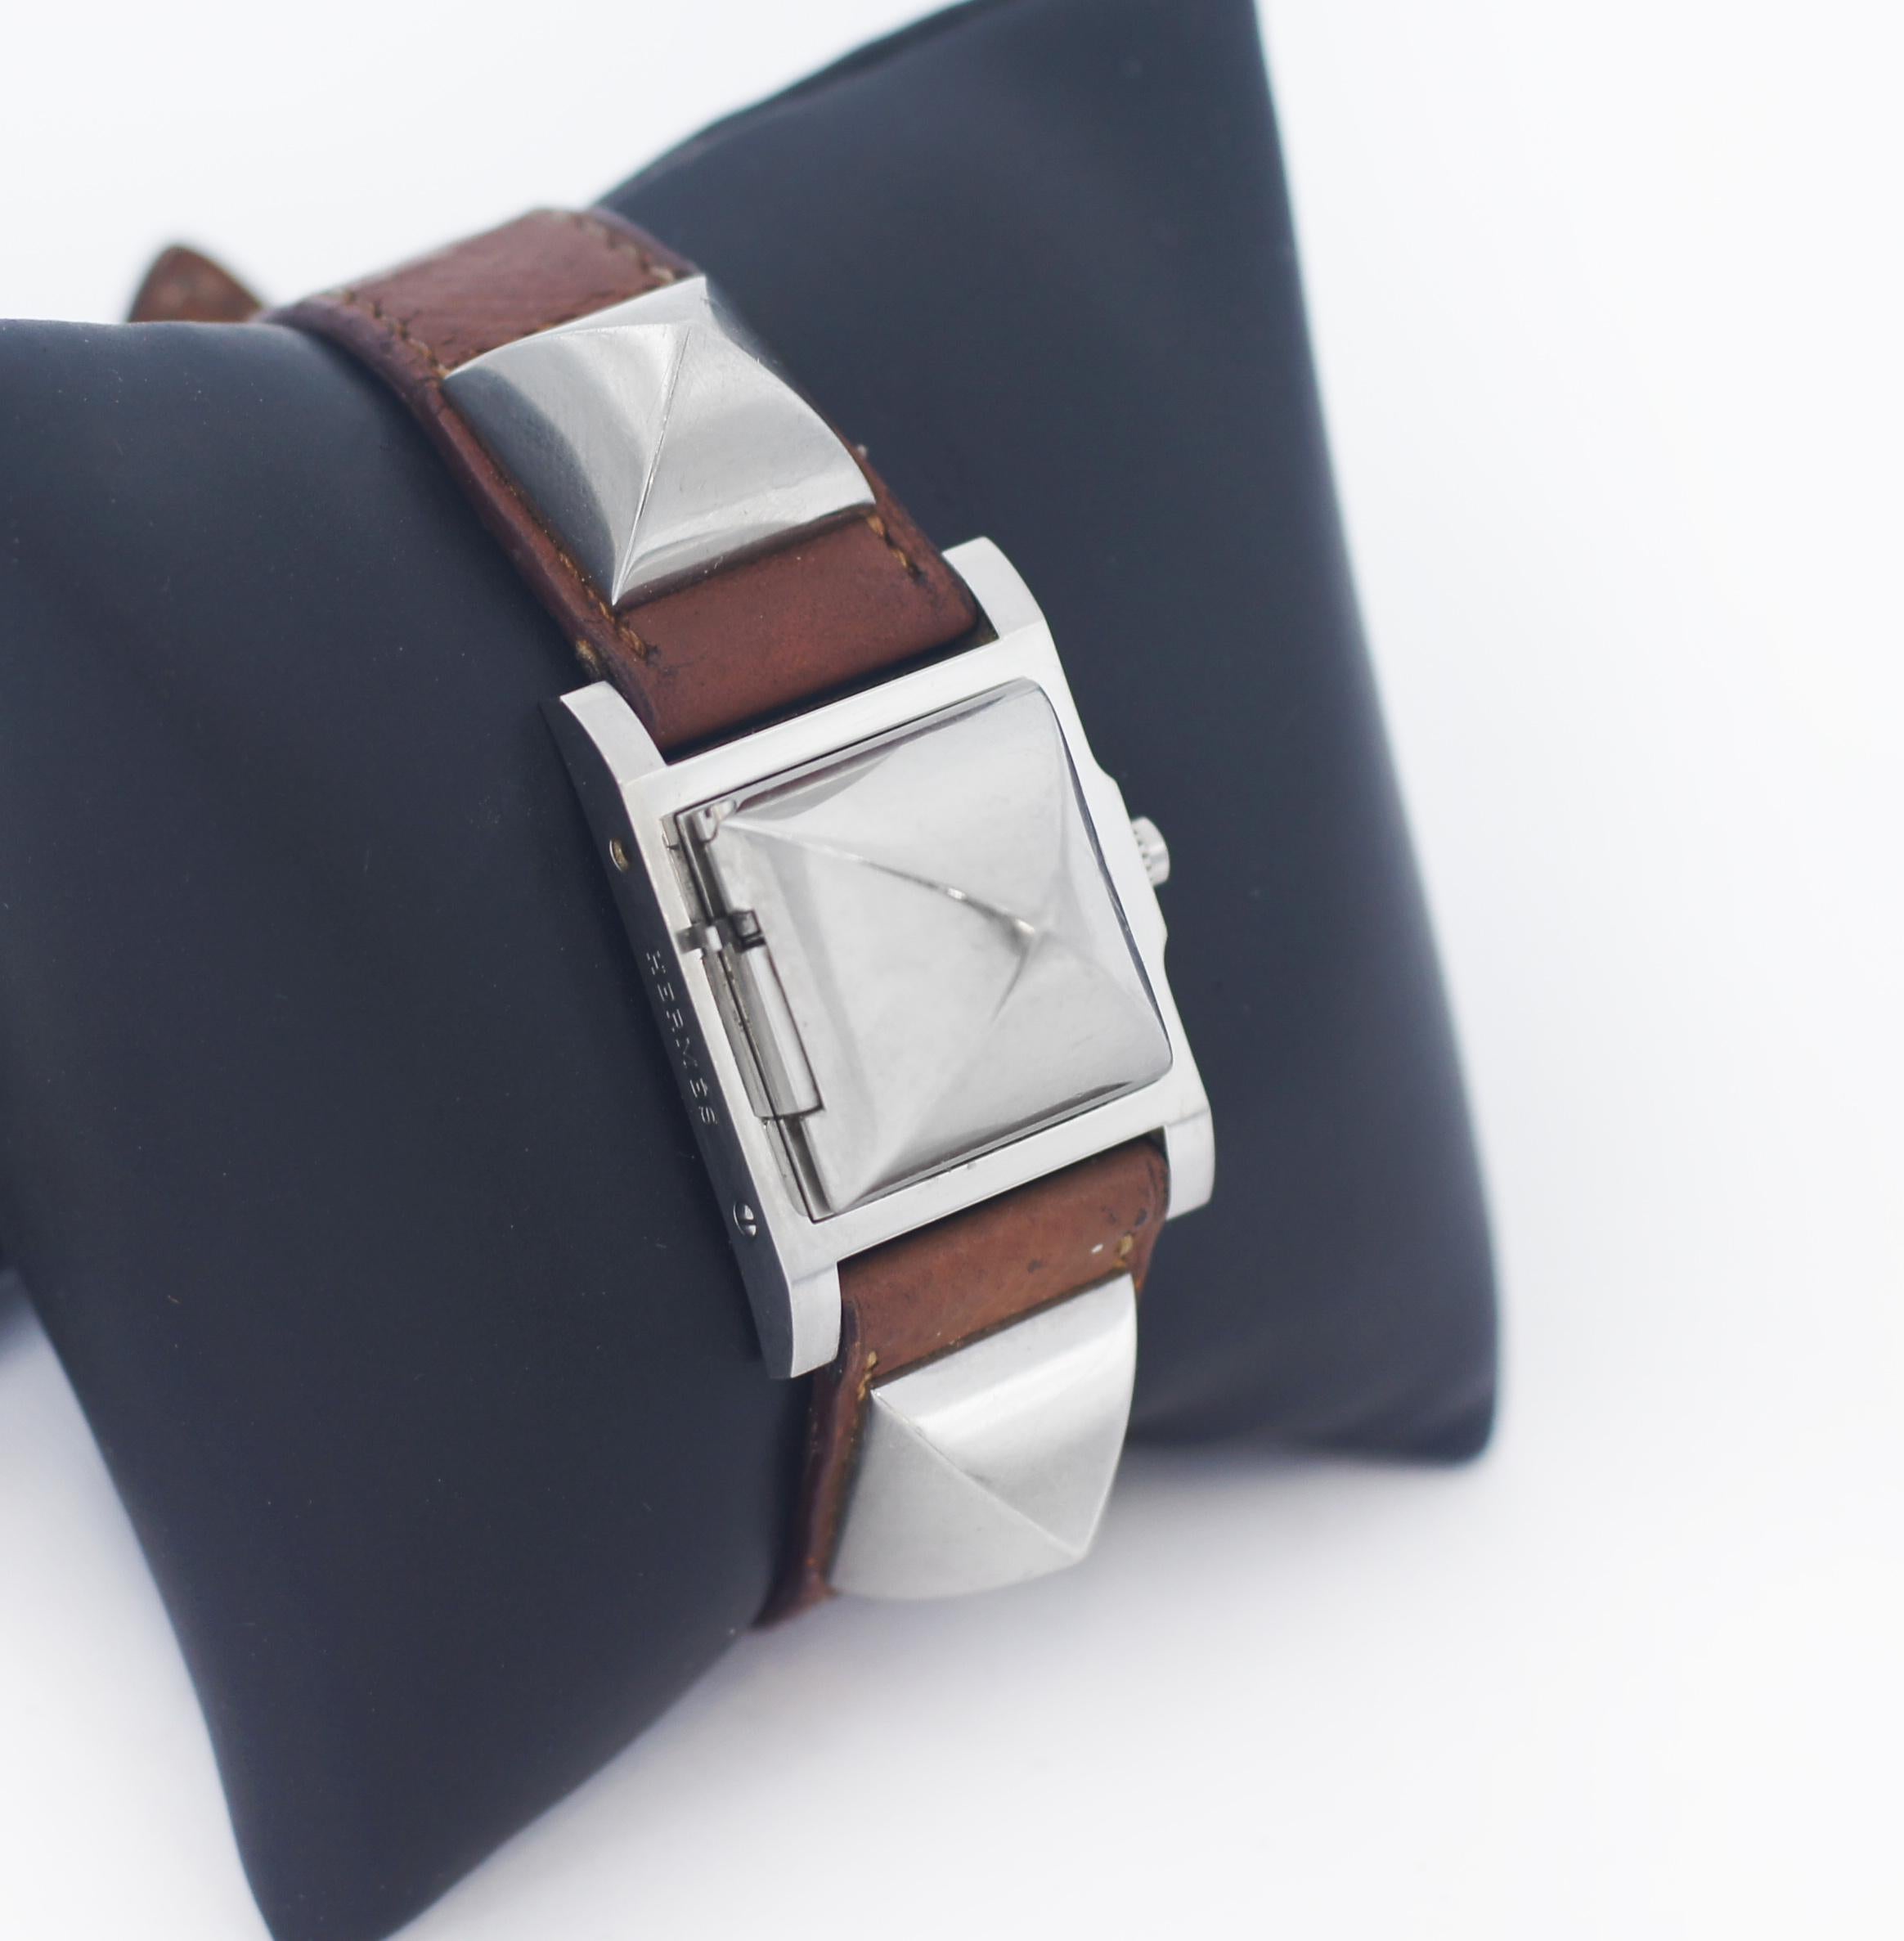 HERMES
Model num: ME2.210
Square: Case with cover
Production Approx. in 2010
Serial # on watch
Case: 23mm x 23mm
Band width: 18mm Hermes original band
Movements: Quartz
Color: Silver Studs, Brown Leather band
Material: Stainless steel
Country of